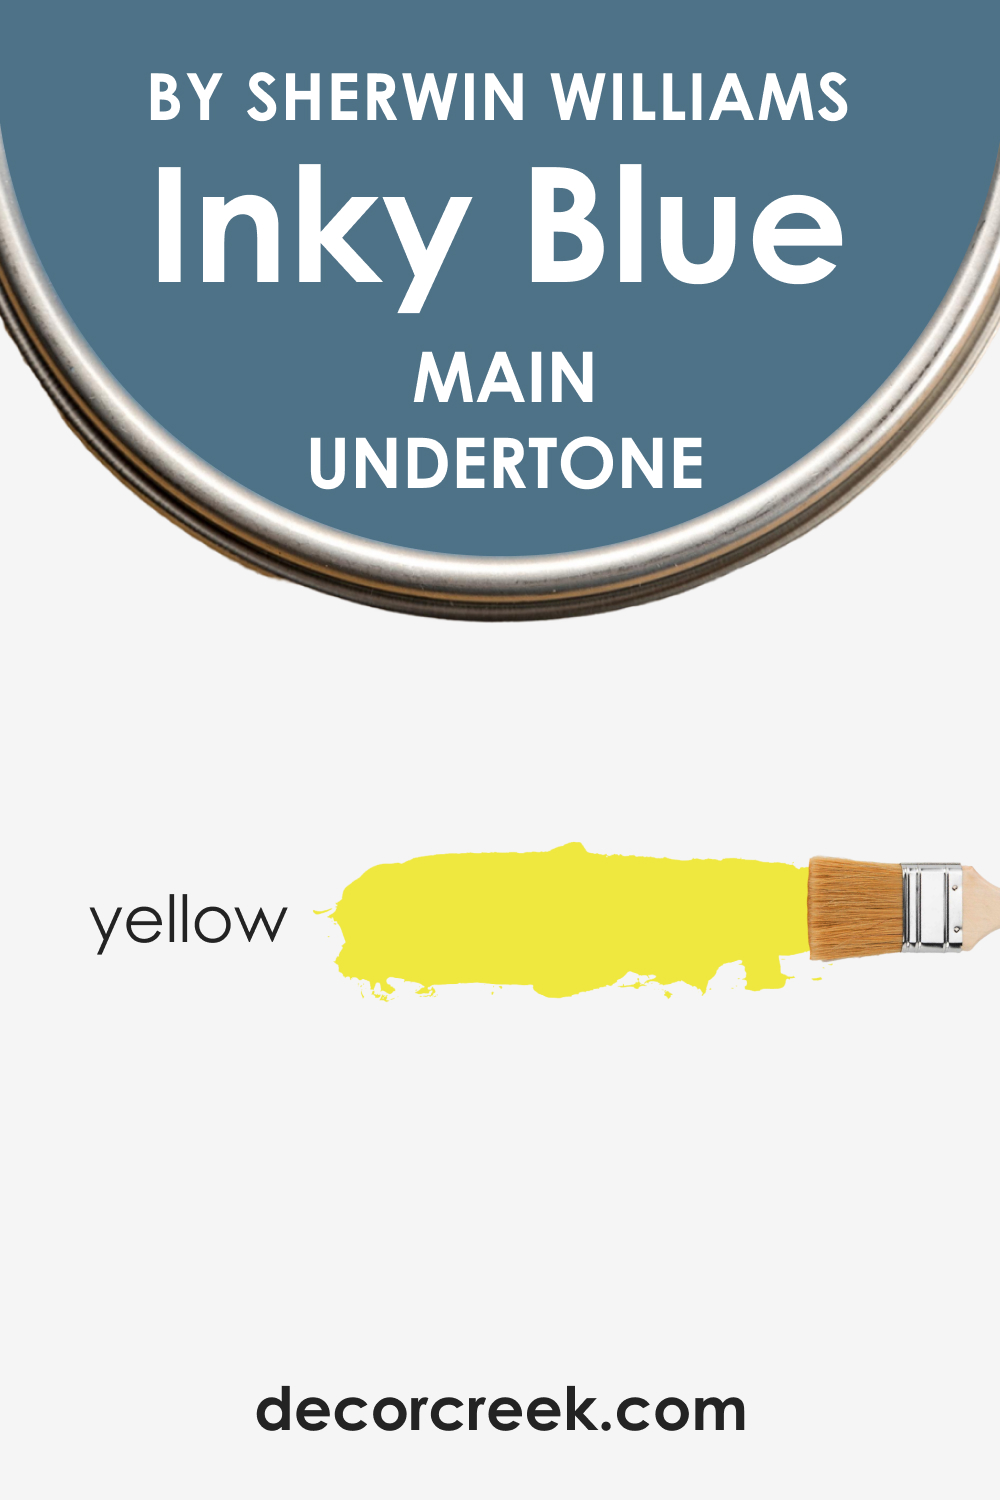 What Undertones Does Inky Blue SW 9149 Have?